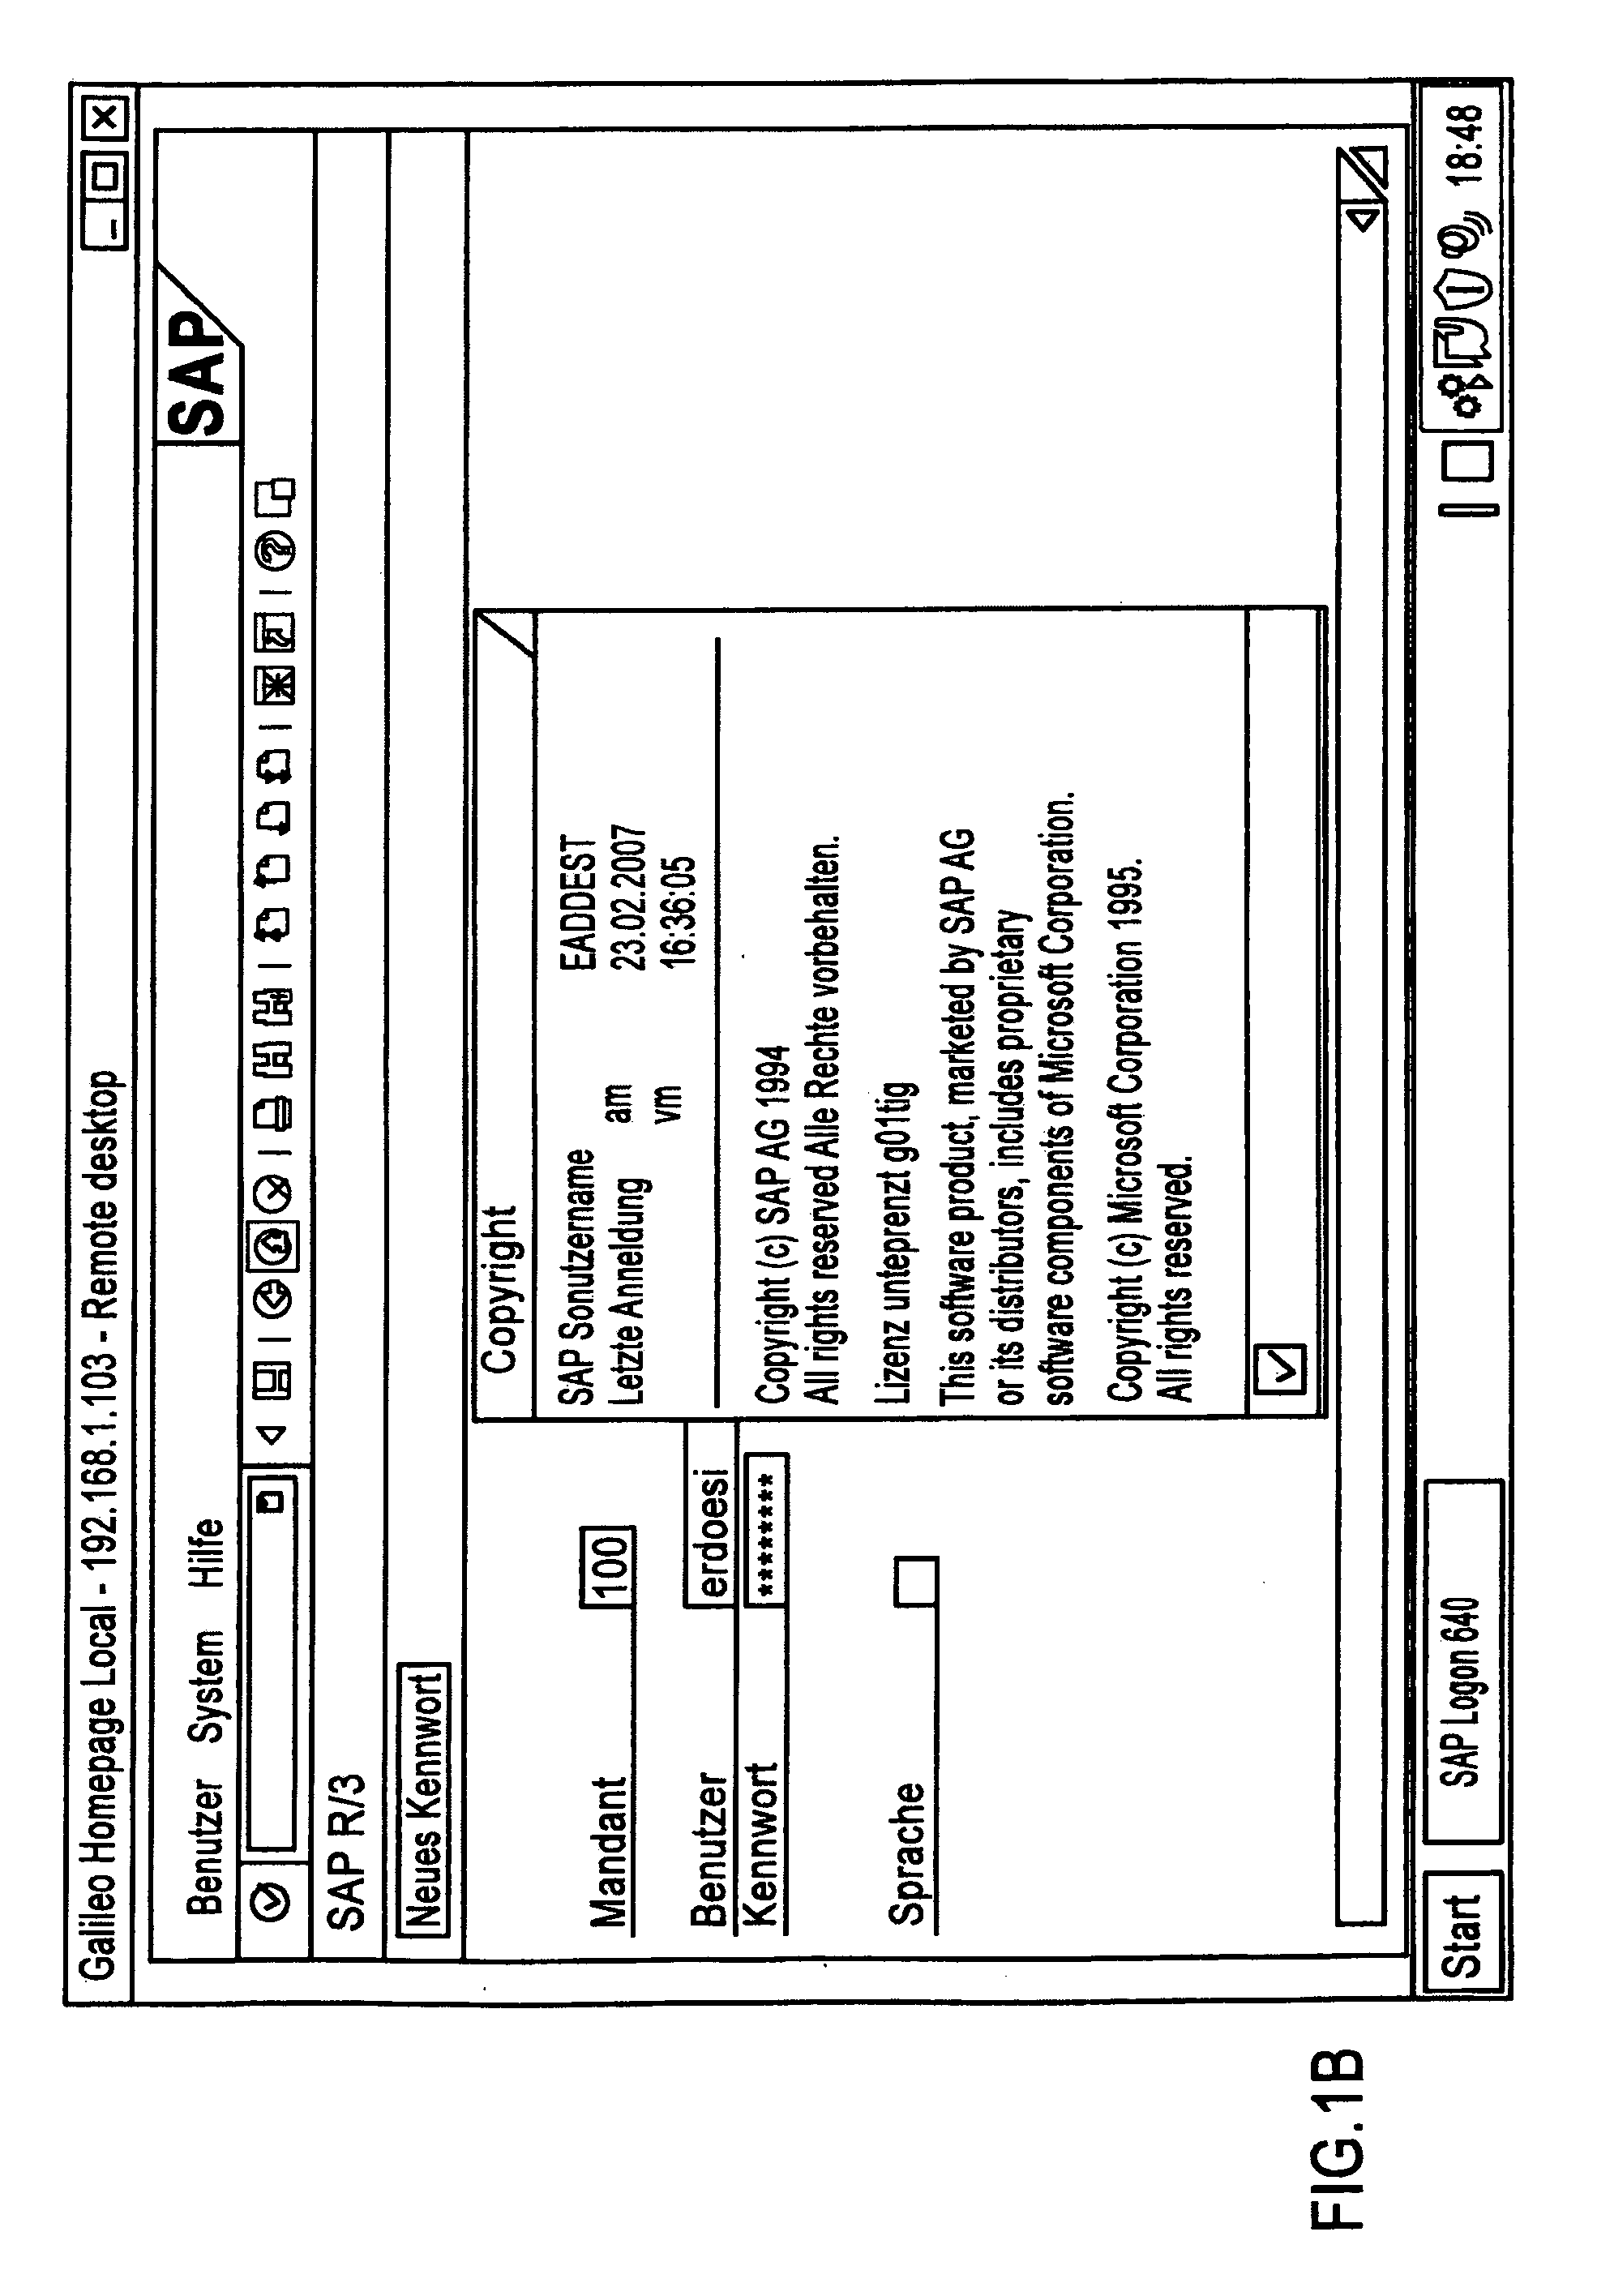 Software event recording and analysis system and method of use thereof